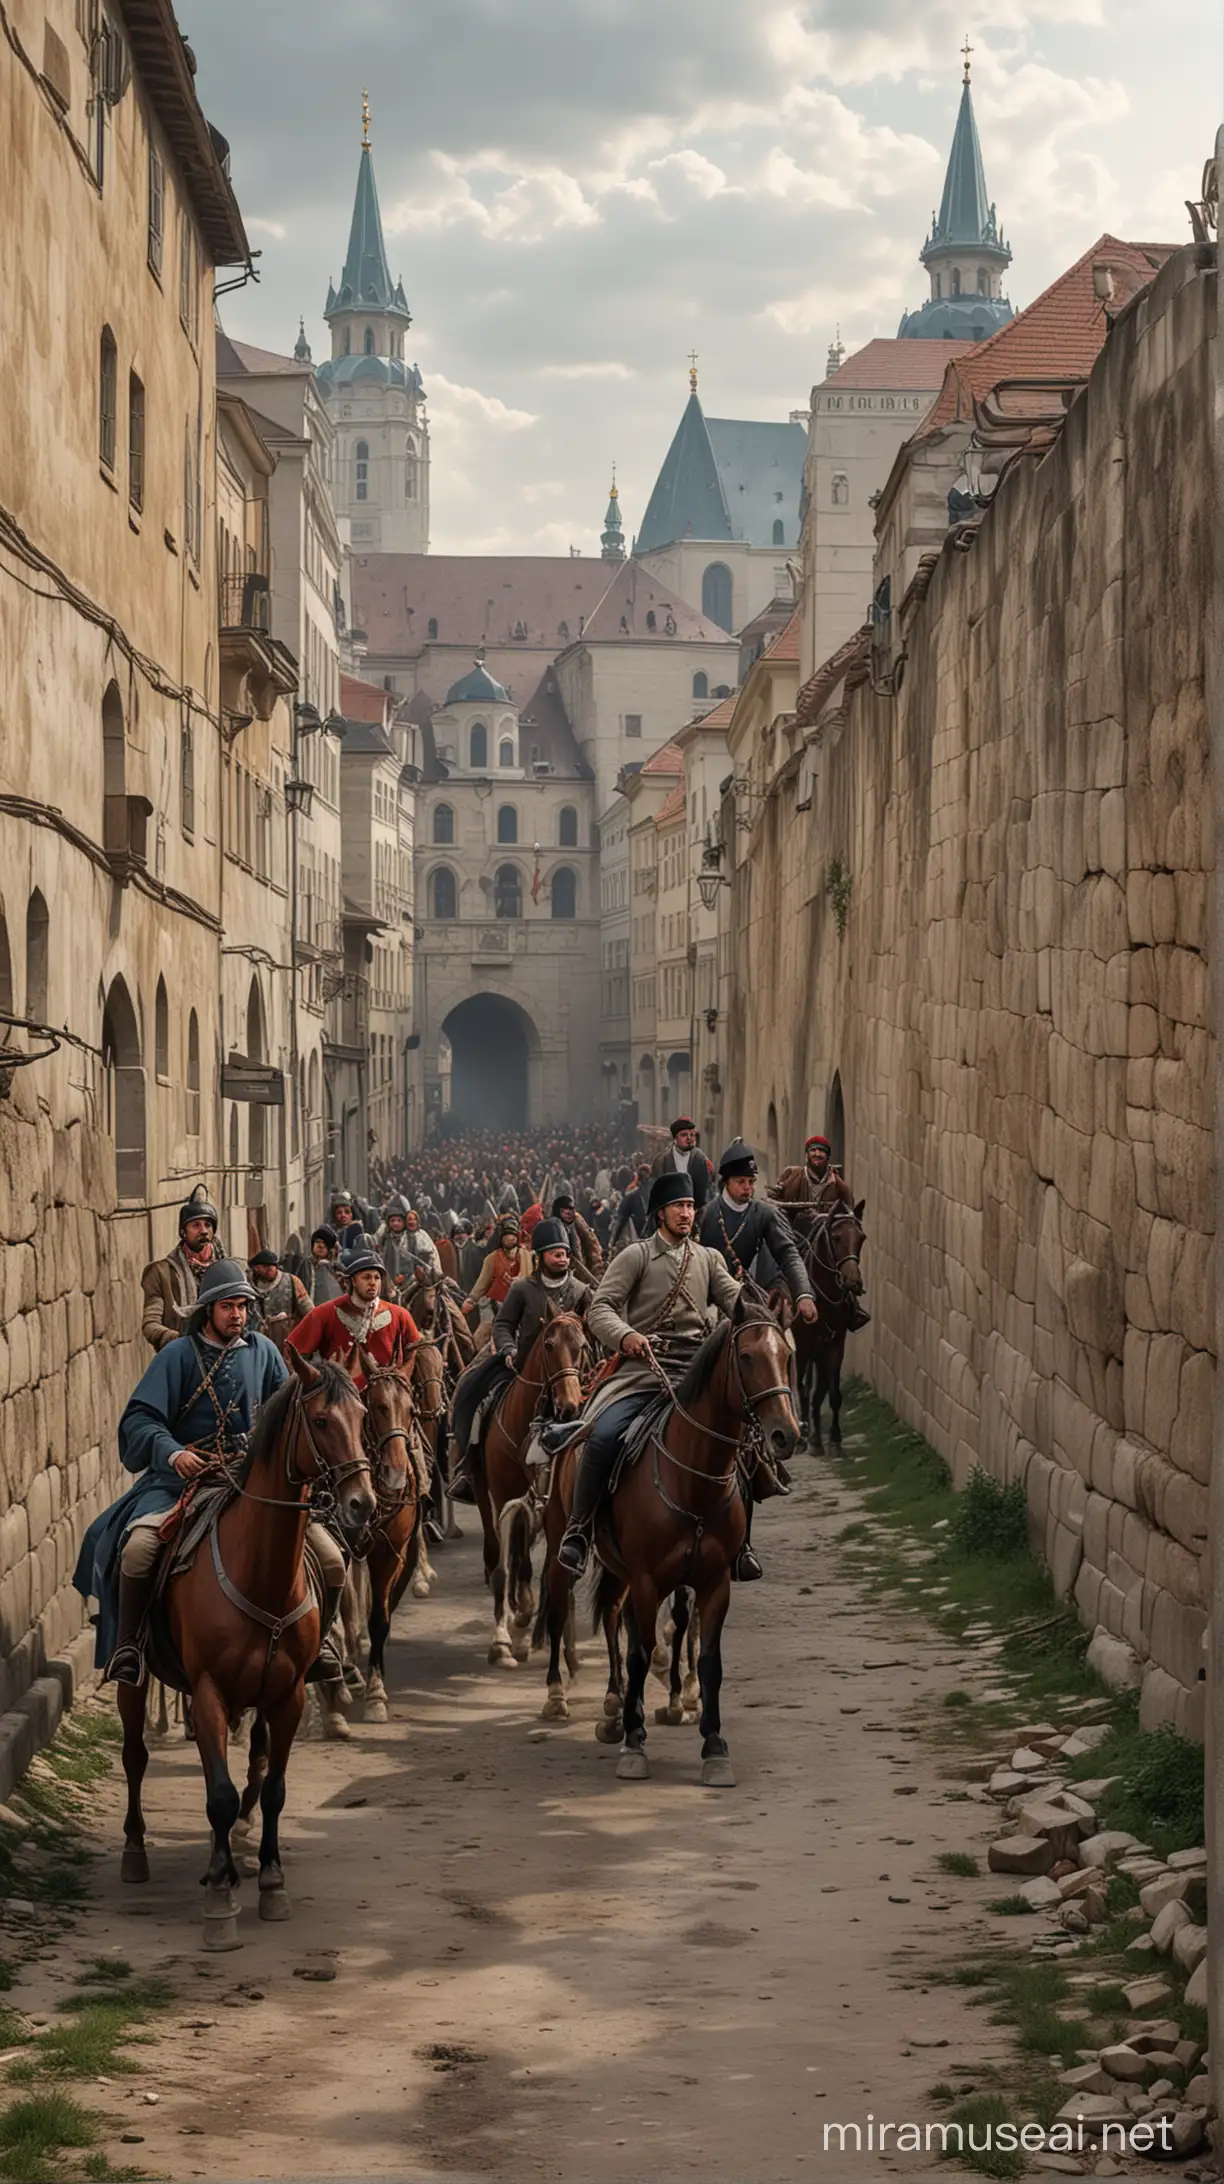 Produce a dramatic image of Vienna's defenders rallying to the city's defence, with citizens fortifying the walls and preparing for battle with the Ottoman army in 1683 when the siege of Vienna happened. Hyper realistic